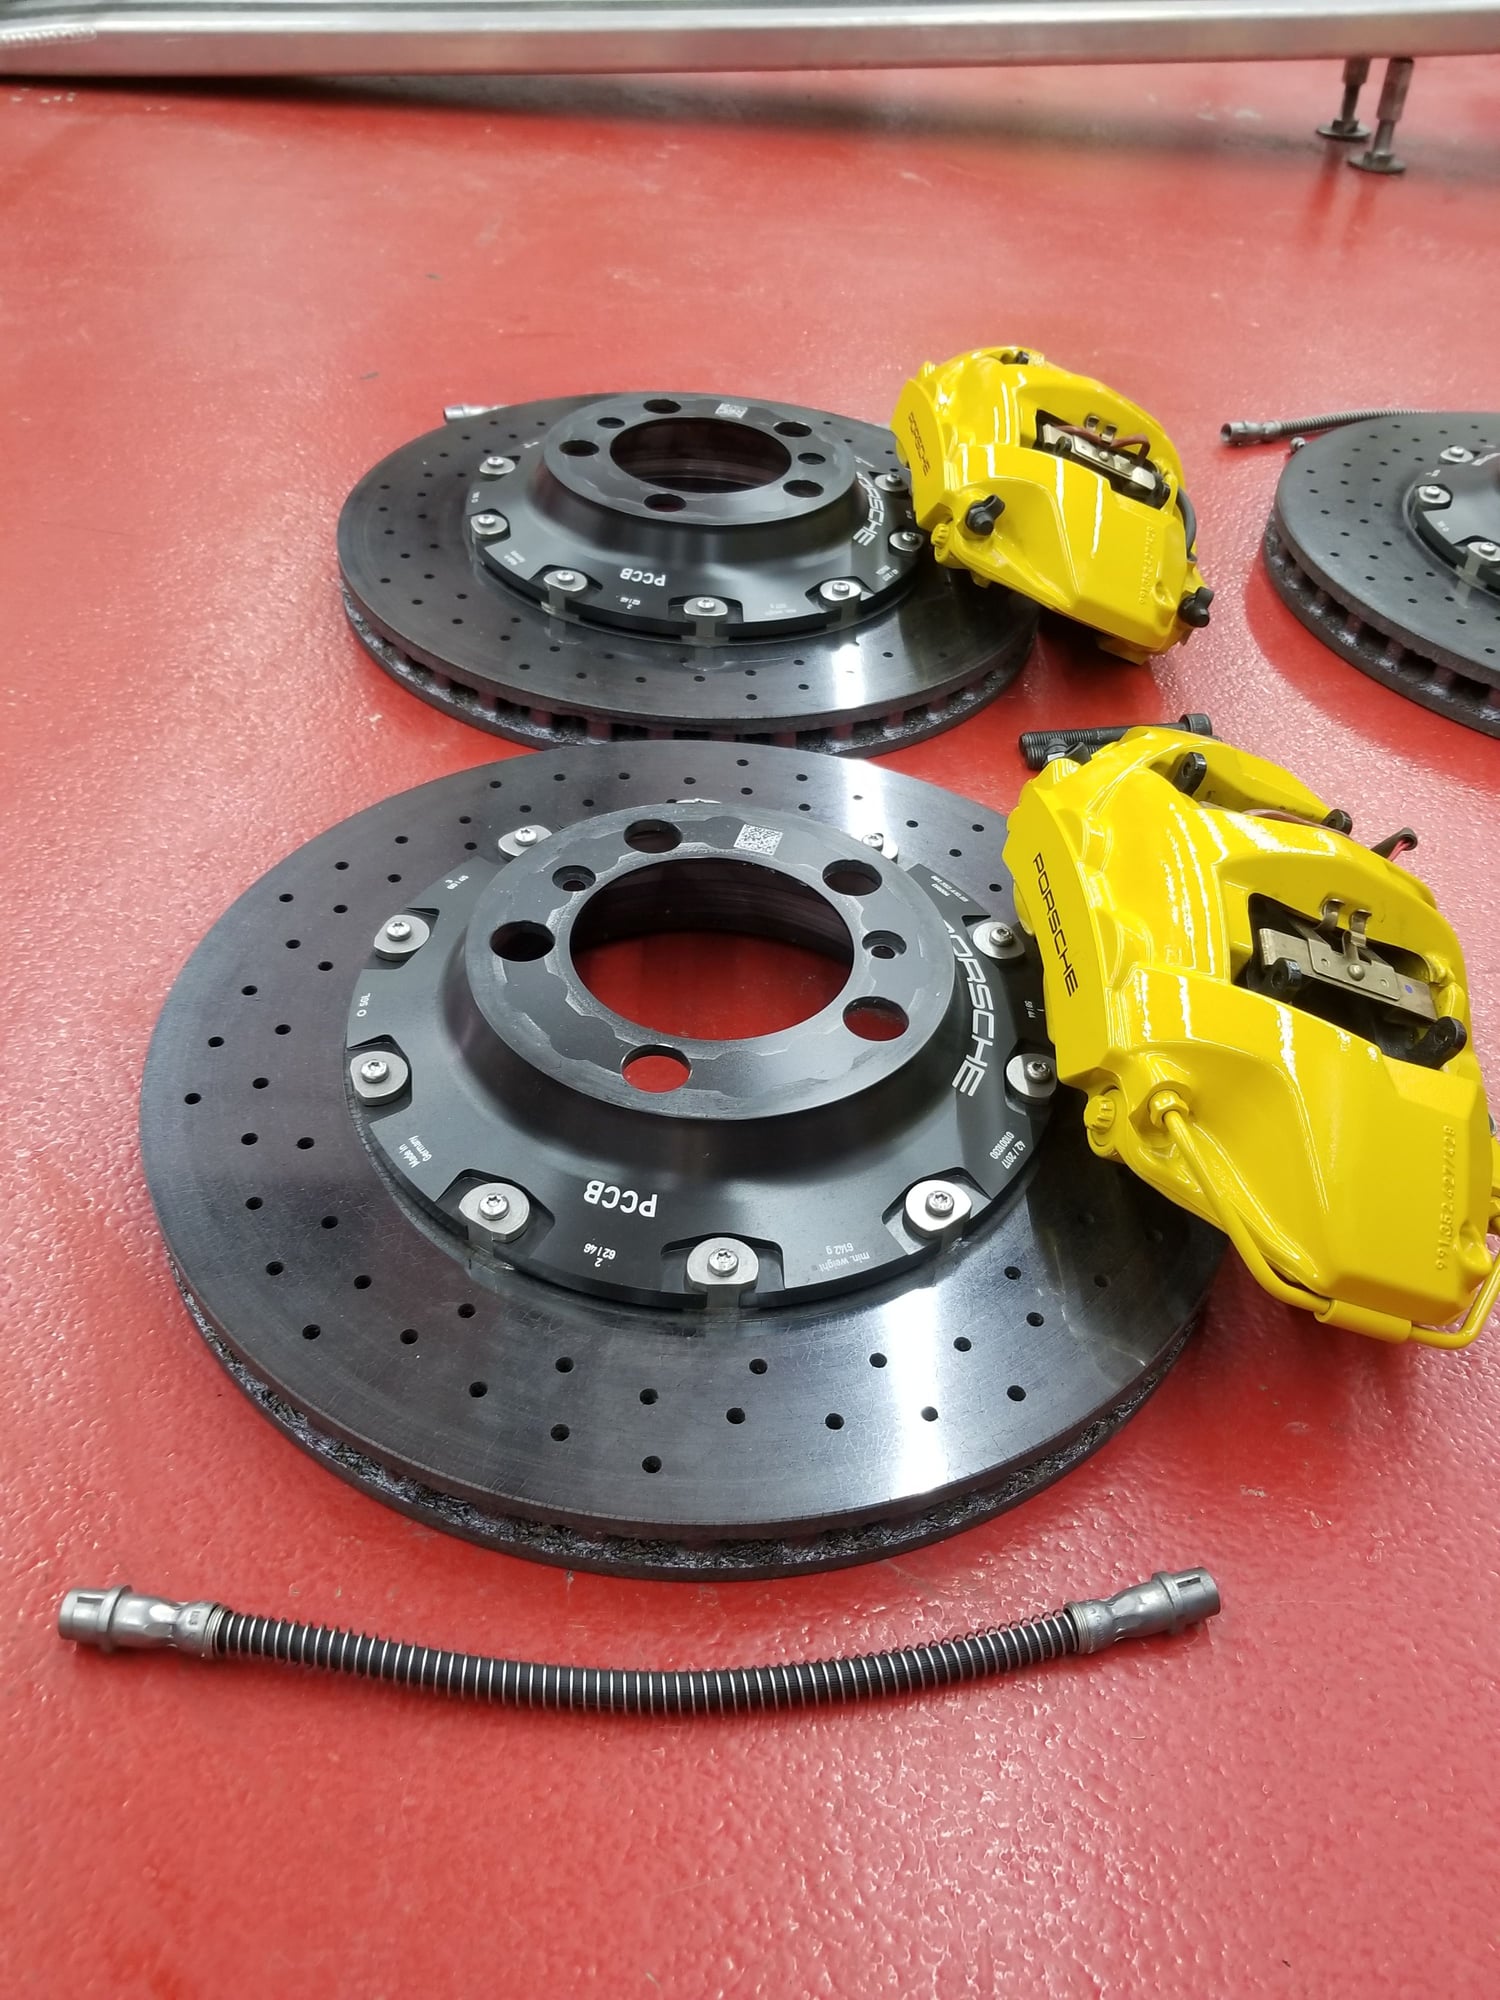 Brakes - Used 991.2 GT3 PCCB brakes and calipers - Used - 2014 to 2019 Porsche GT3 - Atlanta, GA 30309, United States